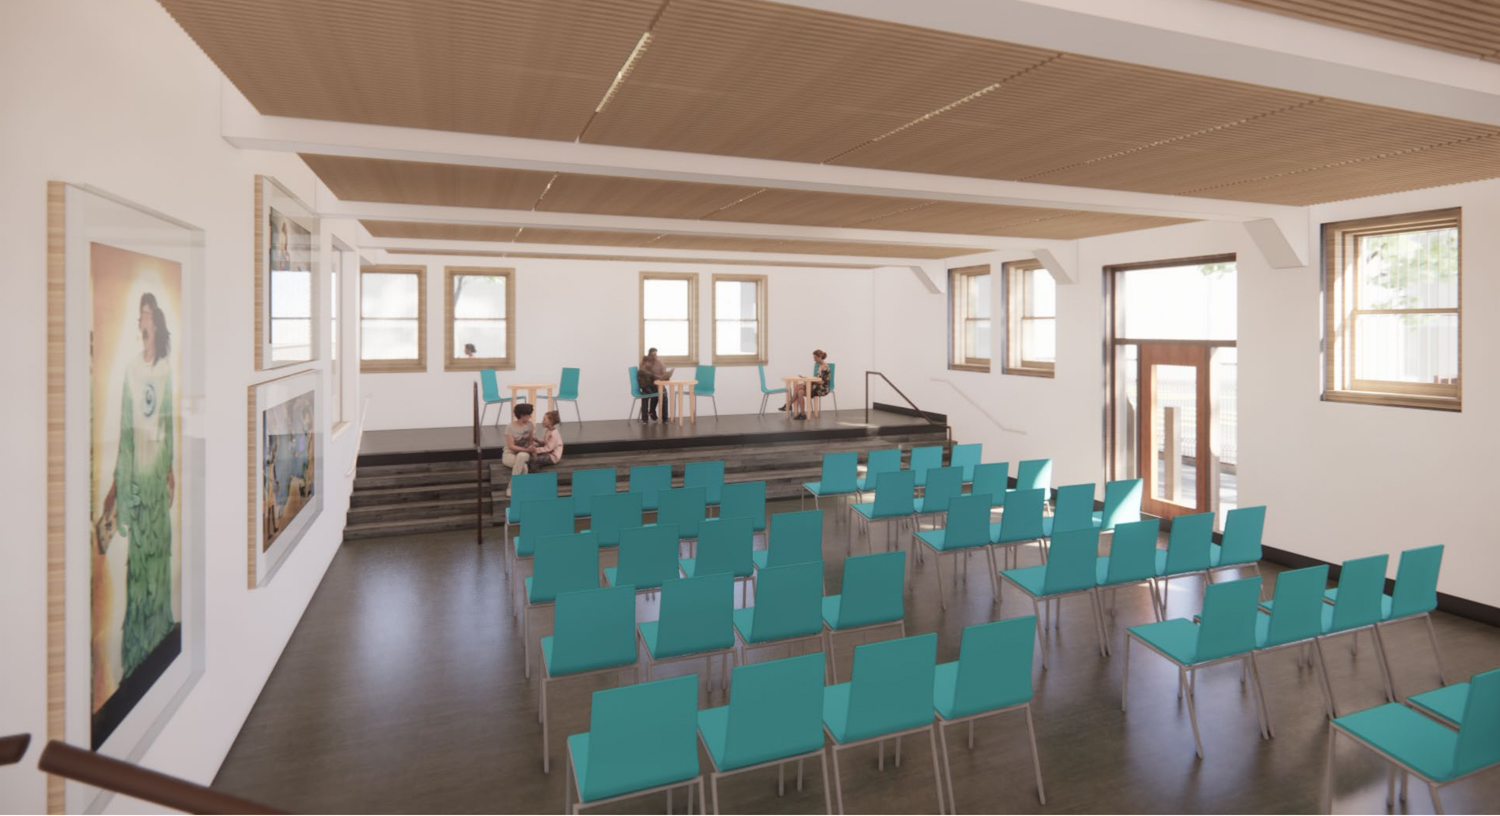 Mission Branch Library Community Room, rendering via SF Public Works